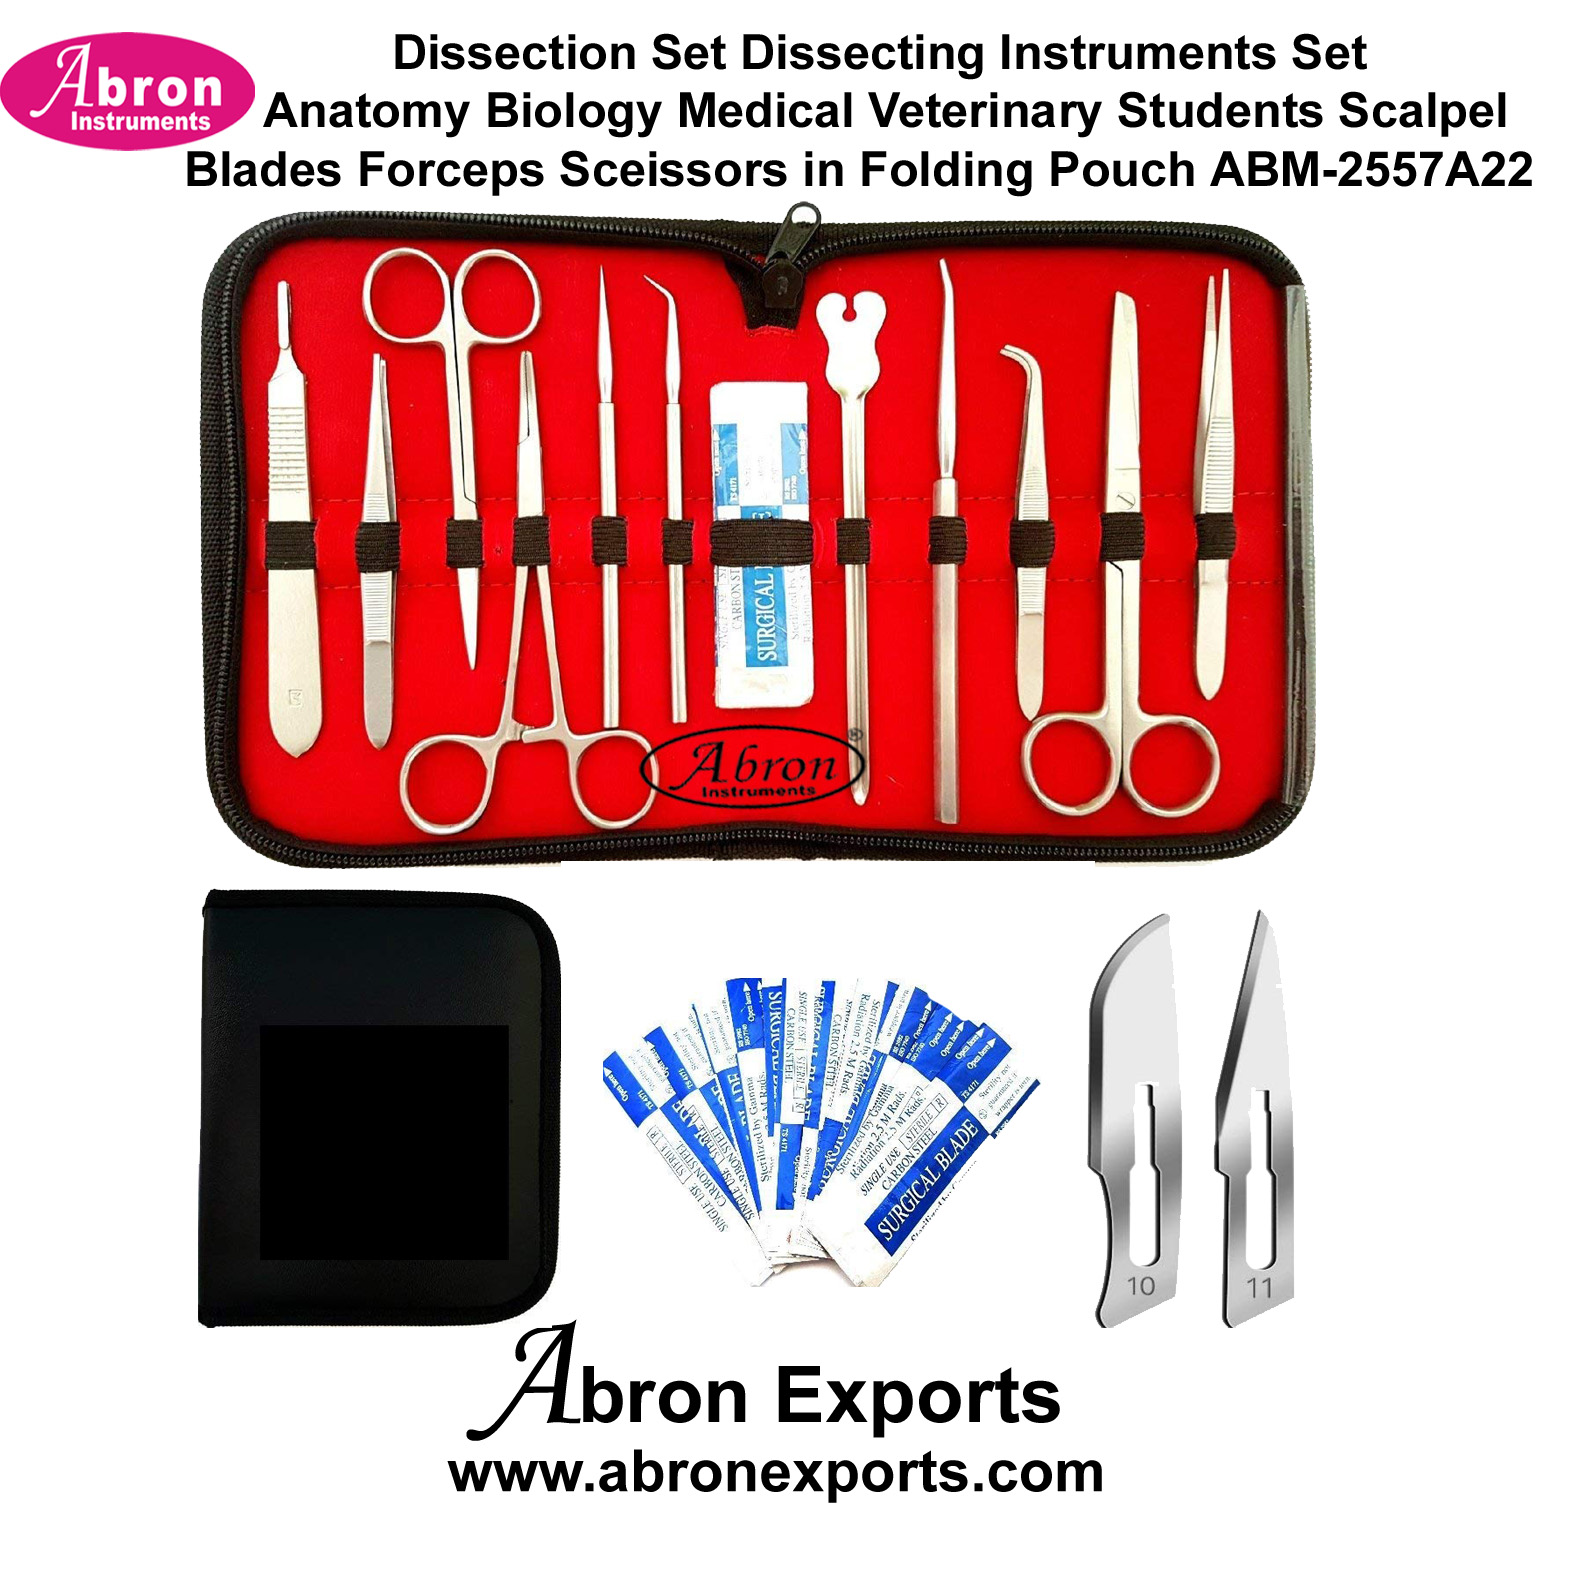 Dissection Set Dissecting Instruments Set Anatomy Biology Medical Veterinary Students Scalpel Blades Forceps Sceissors in Folding Pouch 